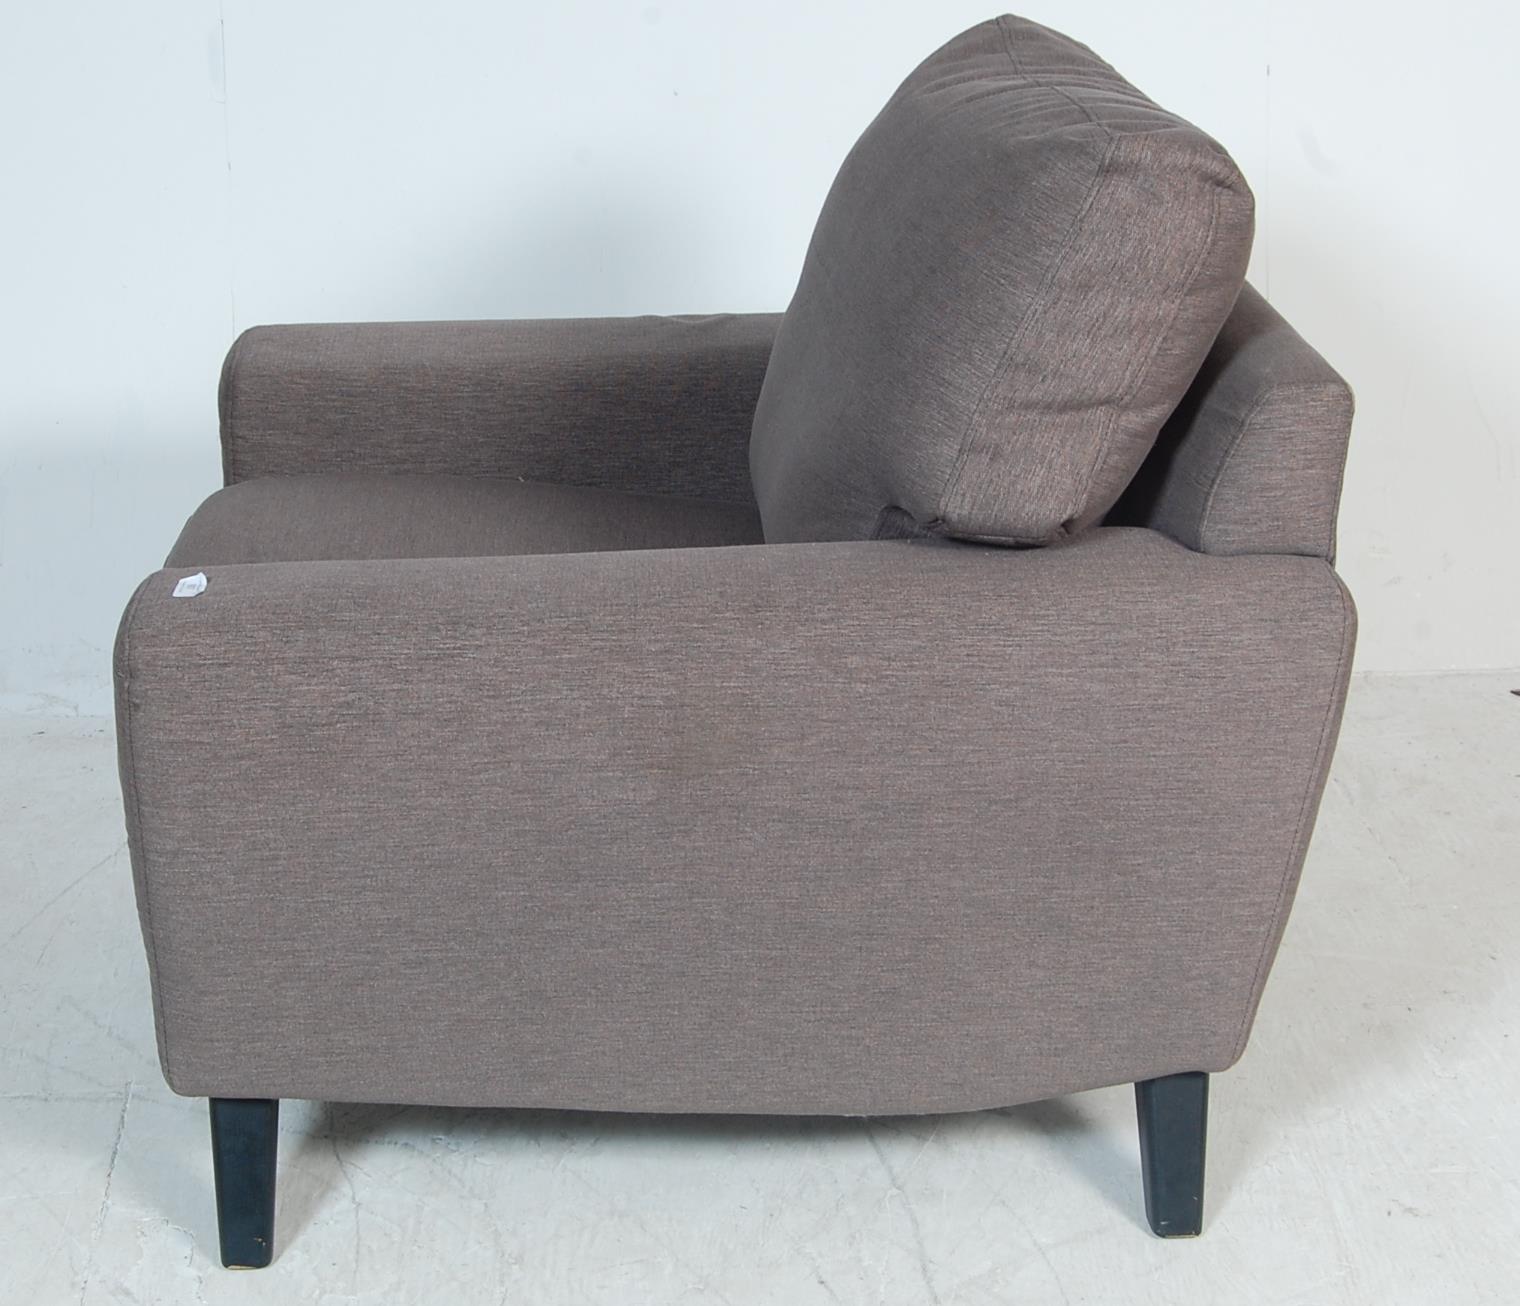 CONTEMPORARY EX SHOP STOCK G PLAN ARMCHAIR - Image 3 of 7